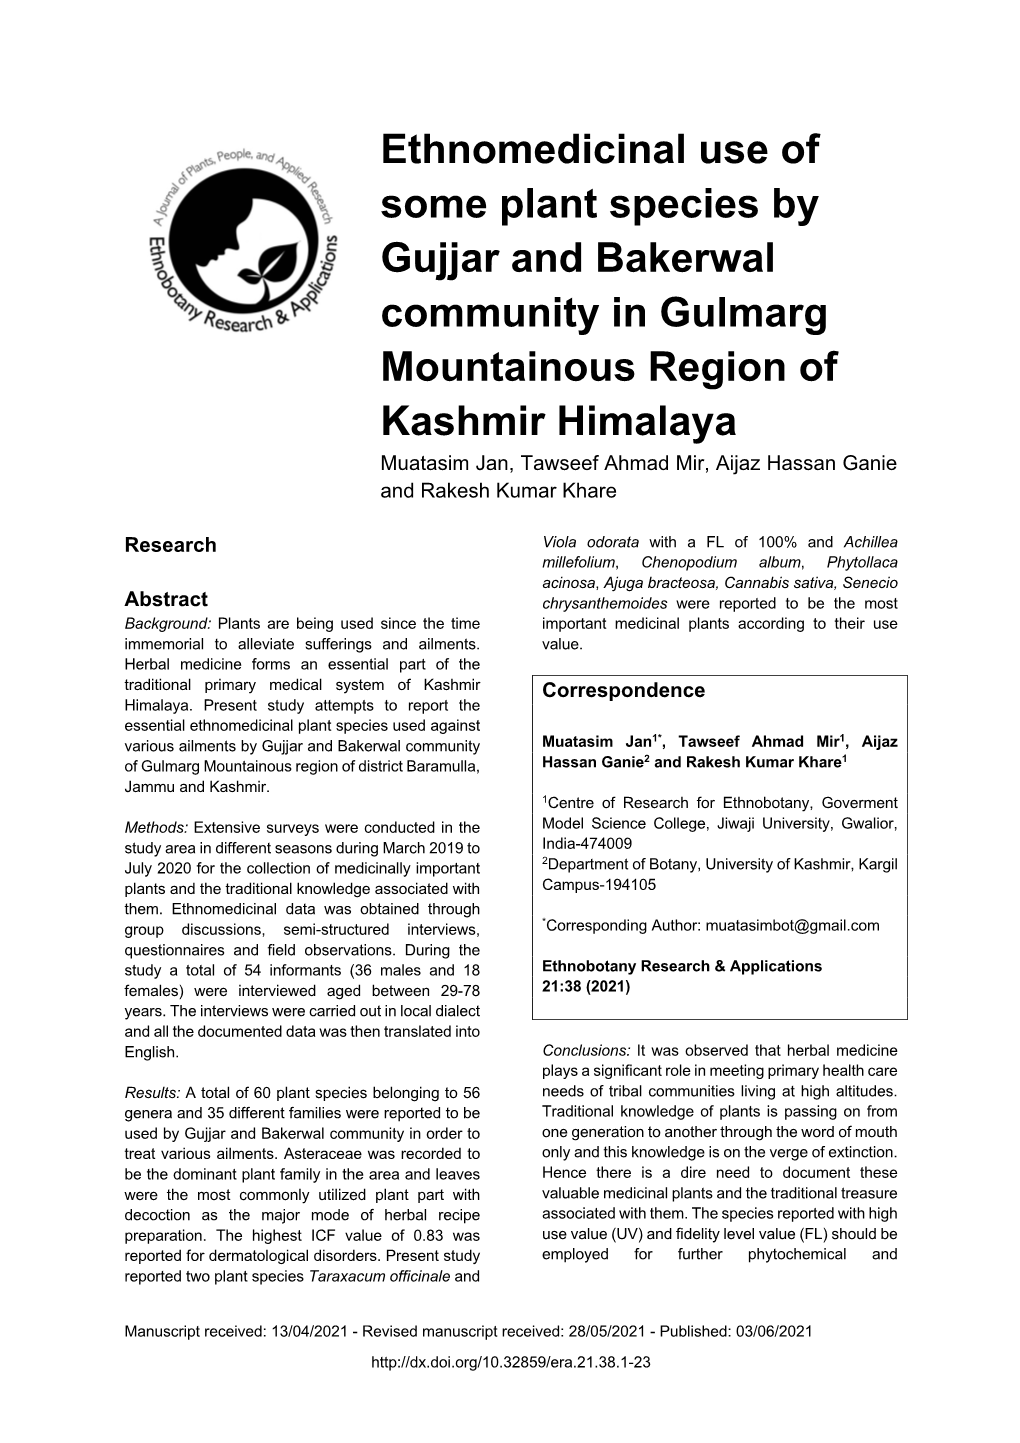 Ethnomedicinal Use of Some Plant Species by Gujjar and Bakerwal Community in Gulmarg Mountainous Region of Kashmir Himalaya